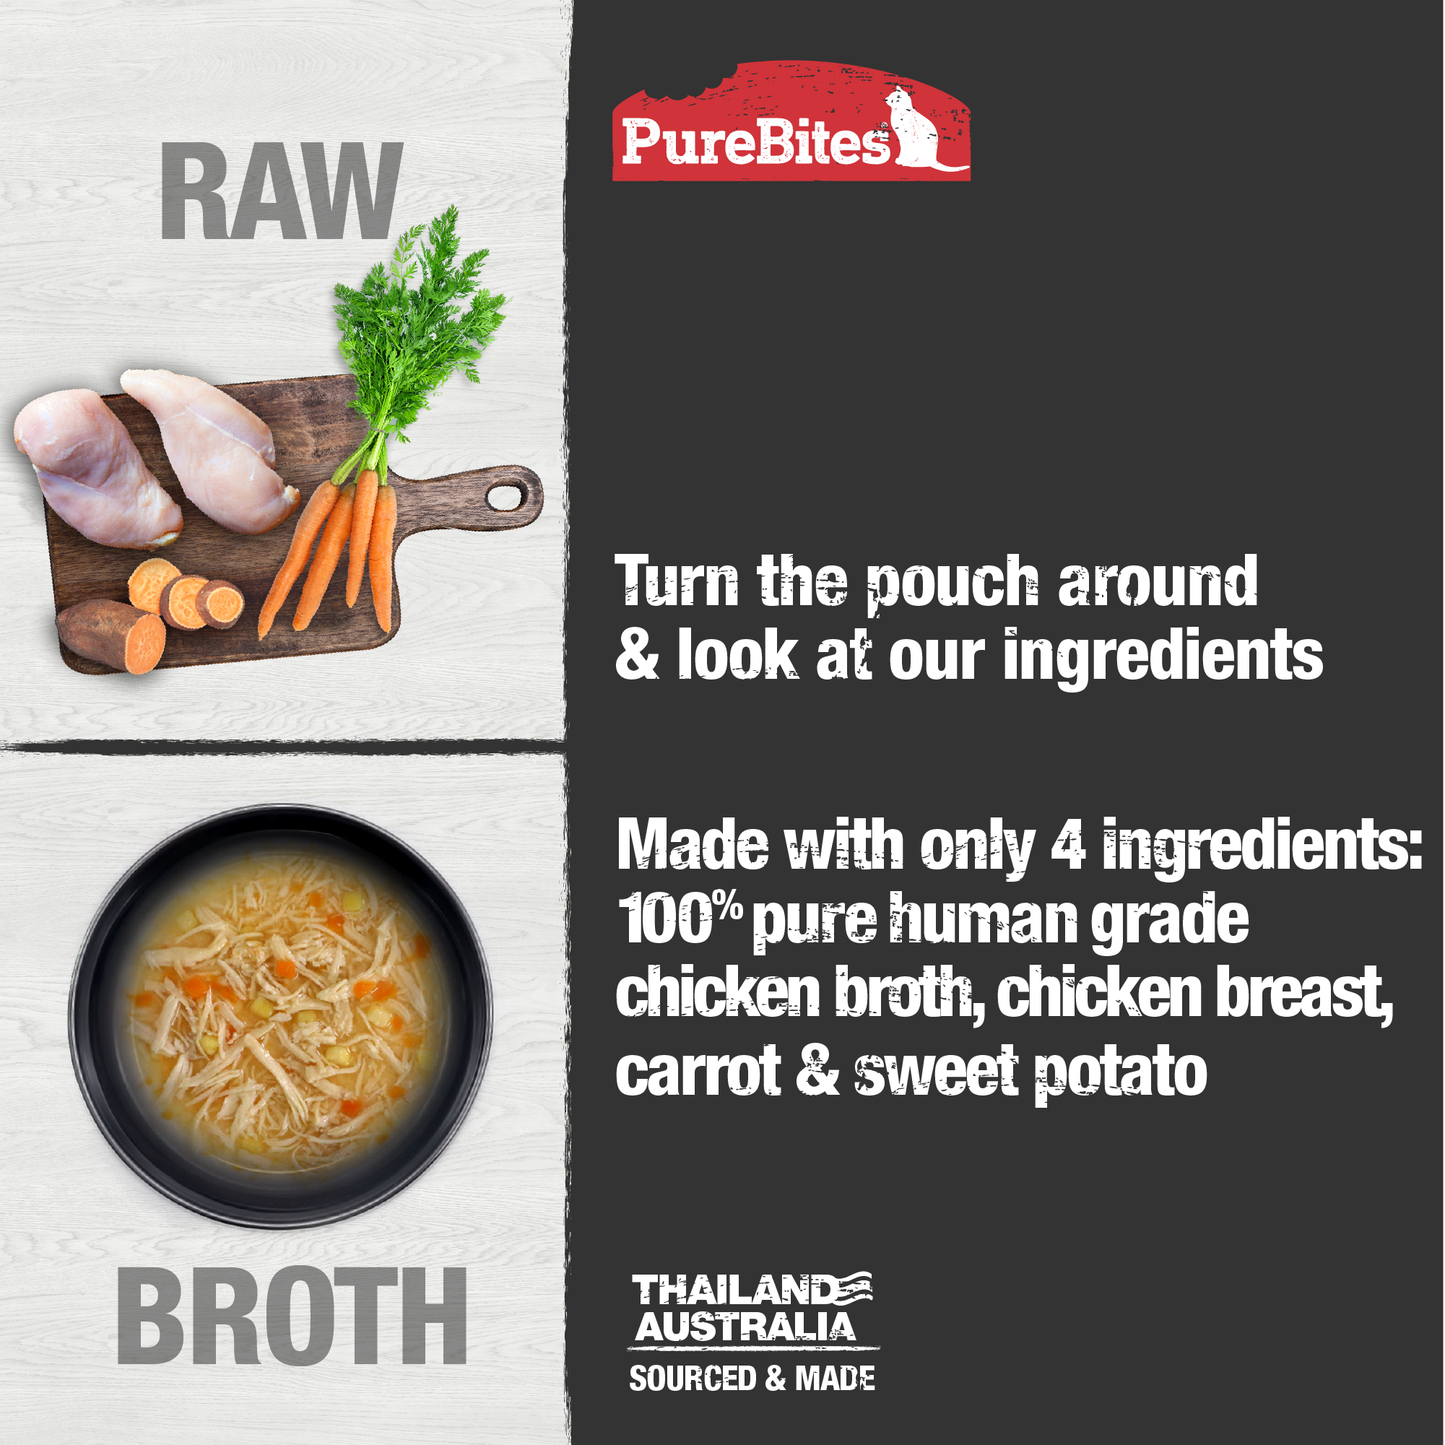 Made with only 4 Ingredients you can read, pronounce, and trust: Human grade chicken broth, chicken breast, carrot, sweet potato.